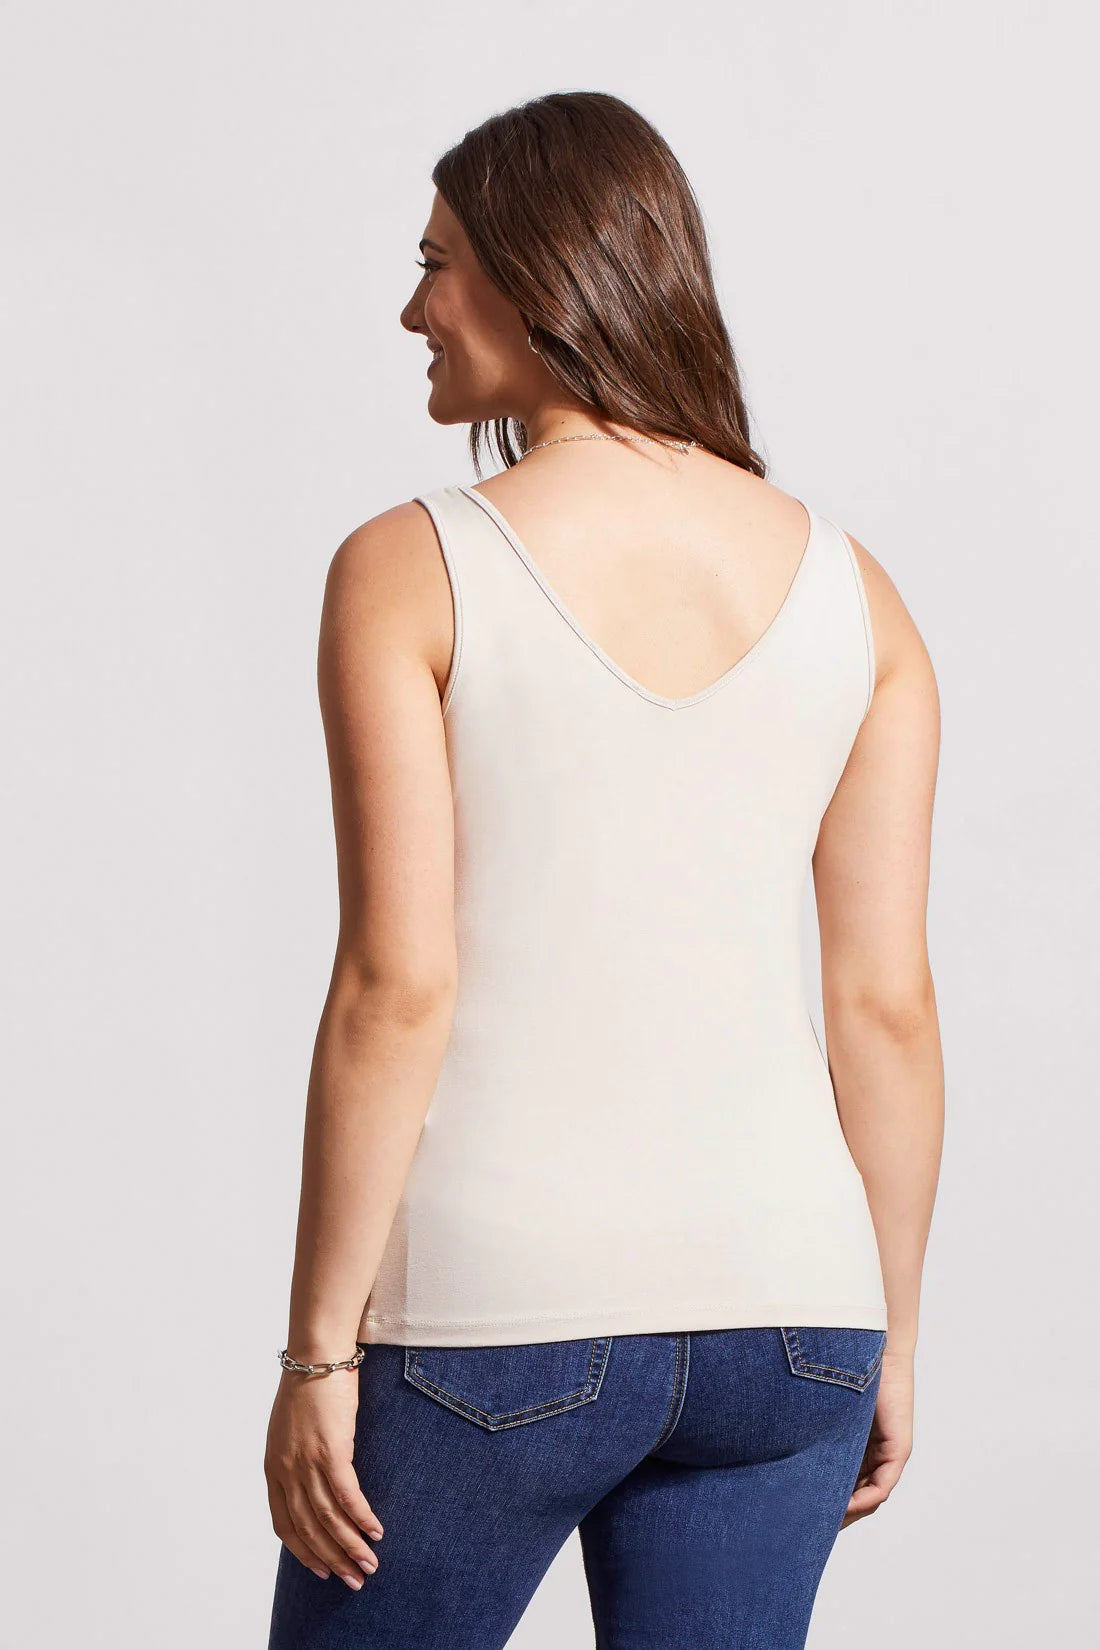 Say hello to the ultimate layering piece. This cami is a wardrobe essential with a versatile design that lets you wear it two ways.